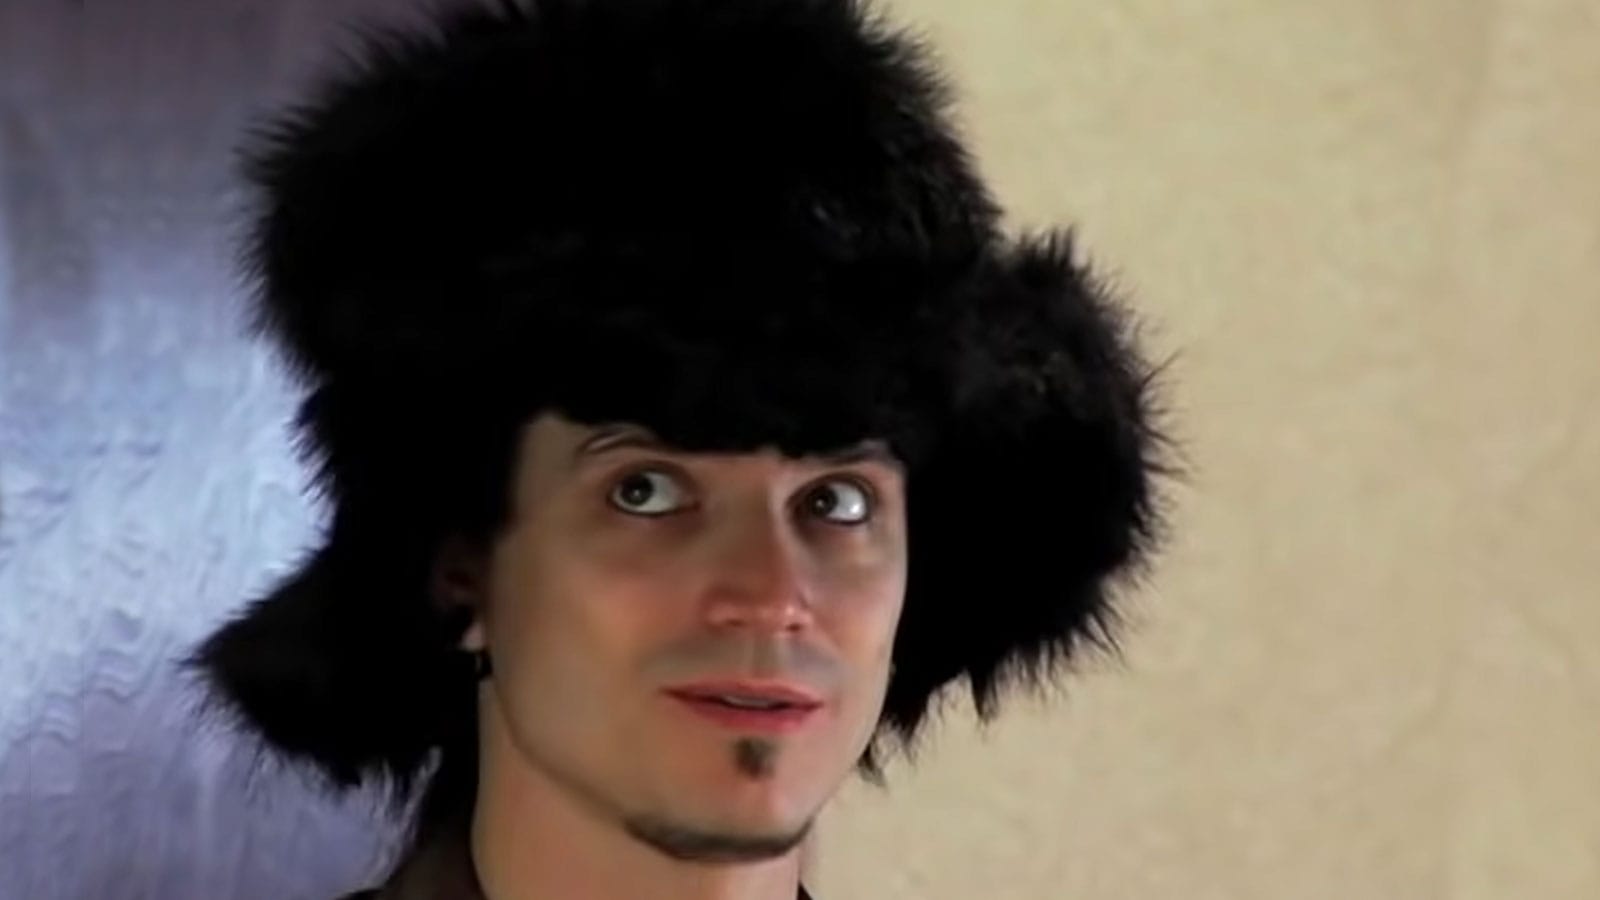 "Pick-Up Artist" Mystery giving YouTube advice in a black fur hat, dark eyeliner, soul patch and sneaky expression